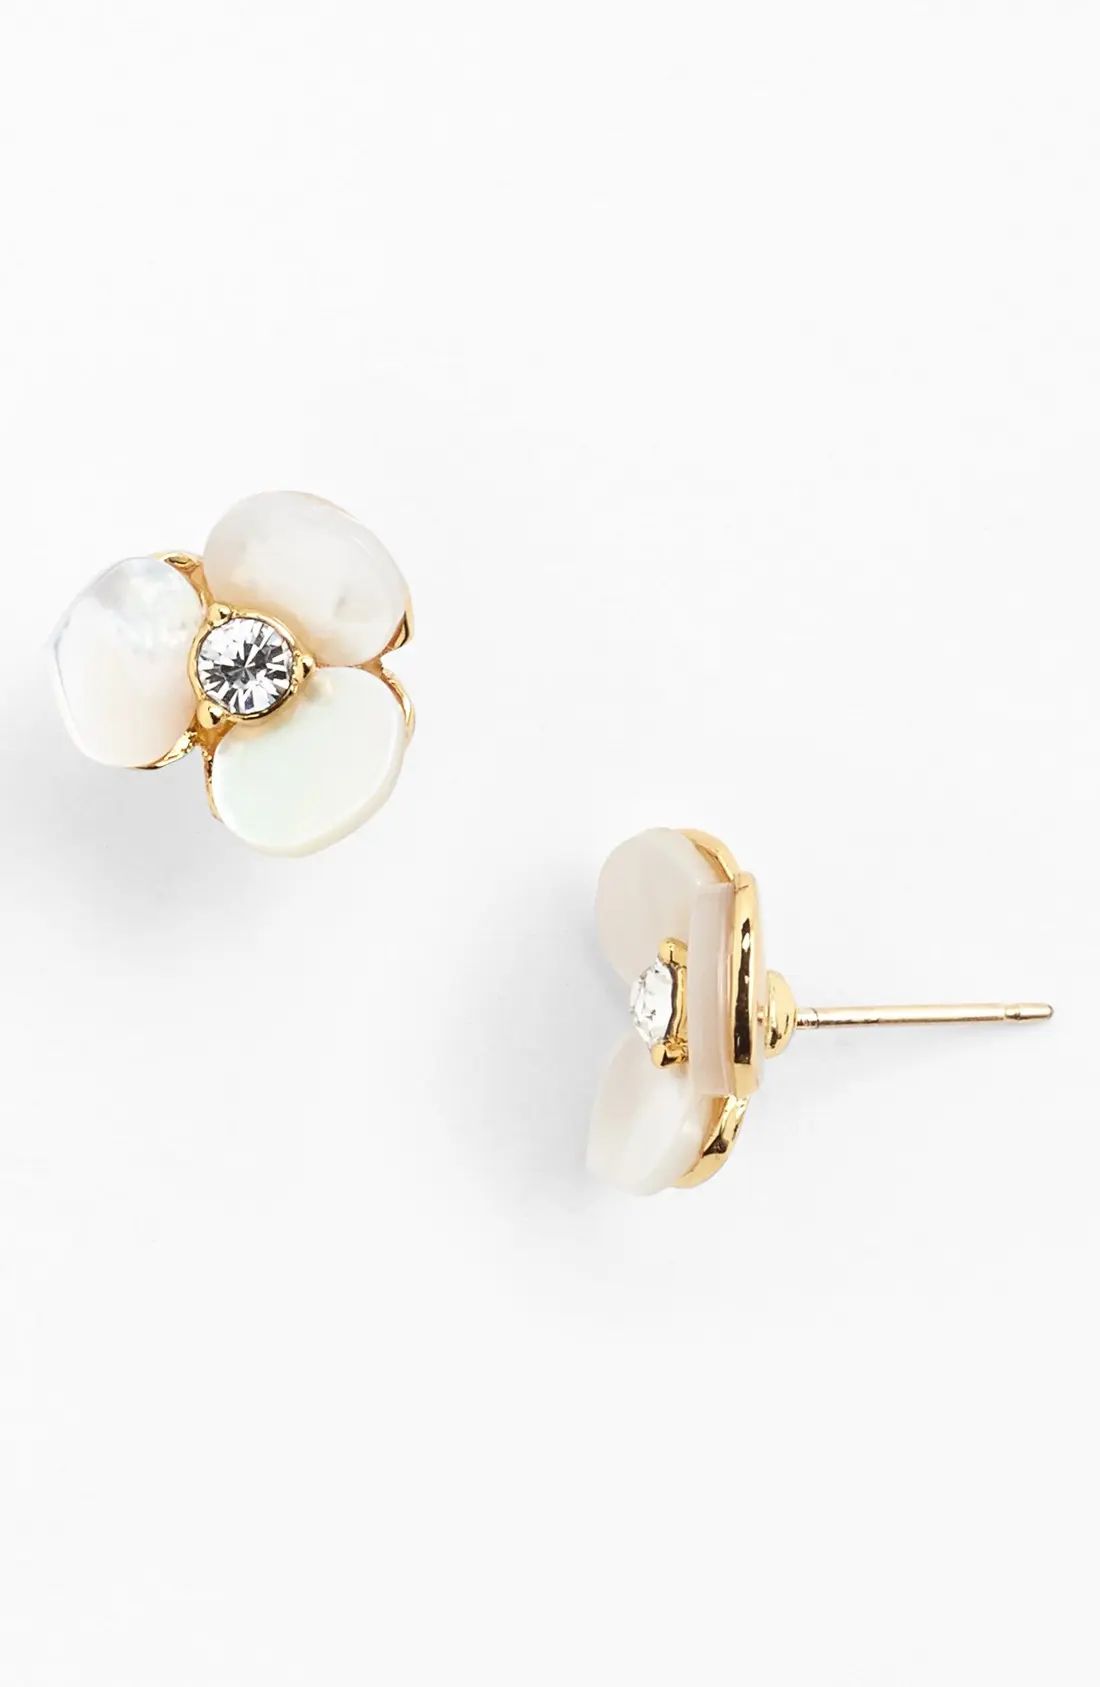 kate spade new york disco pansy stud earrings in Cream/Clear/Gold at Nordstrom | Nordstrom